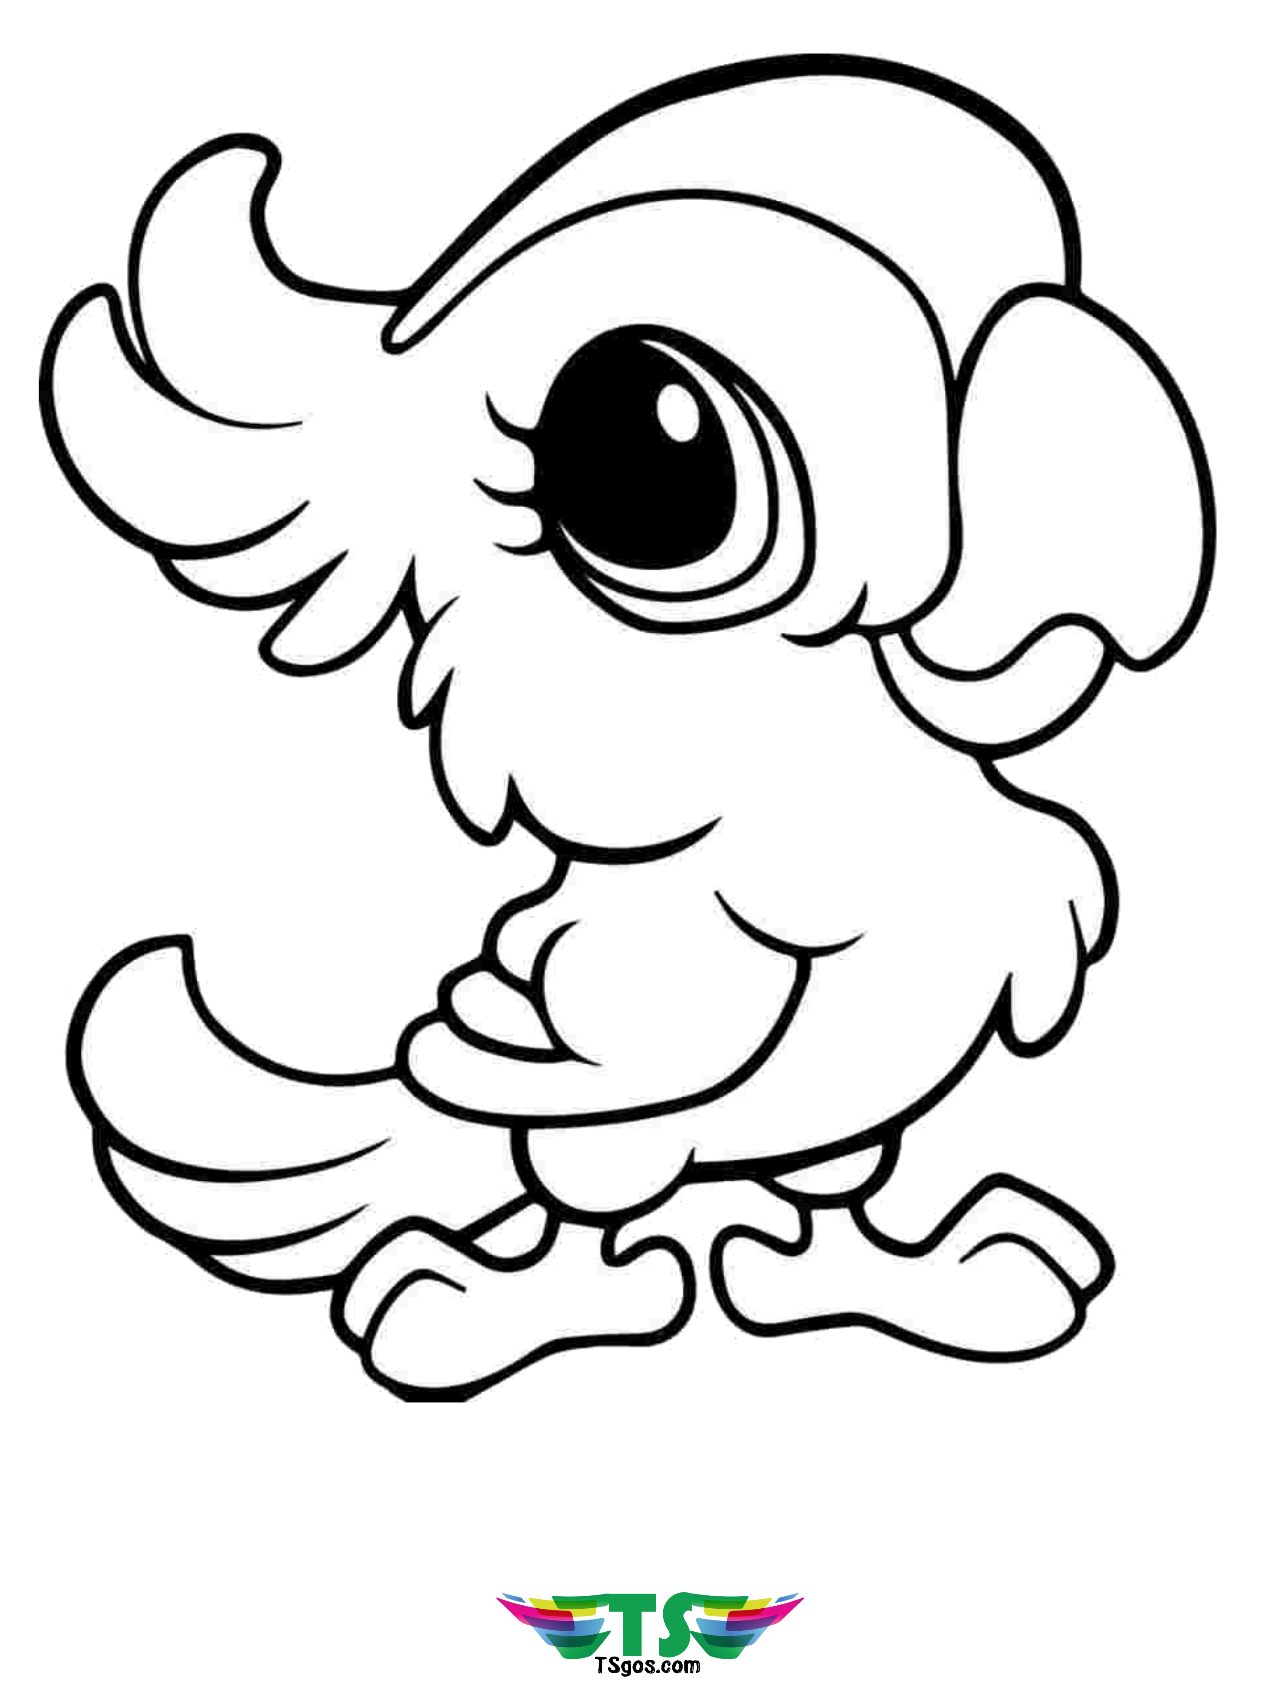 coloring book ~ Cute Bird Coloring Page For Creative Kids Free Printable Pages  Robin Tremendous Bird Coloring Pages For Kids Image Ideas. Cute Bird  Coloring Pages For Kids Christmas. Angry Bird Coloring